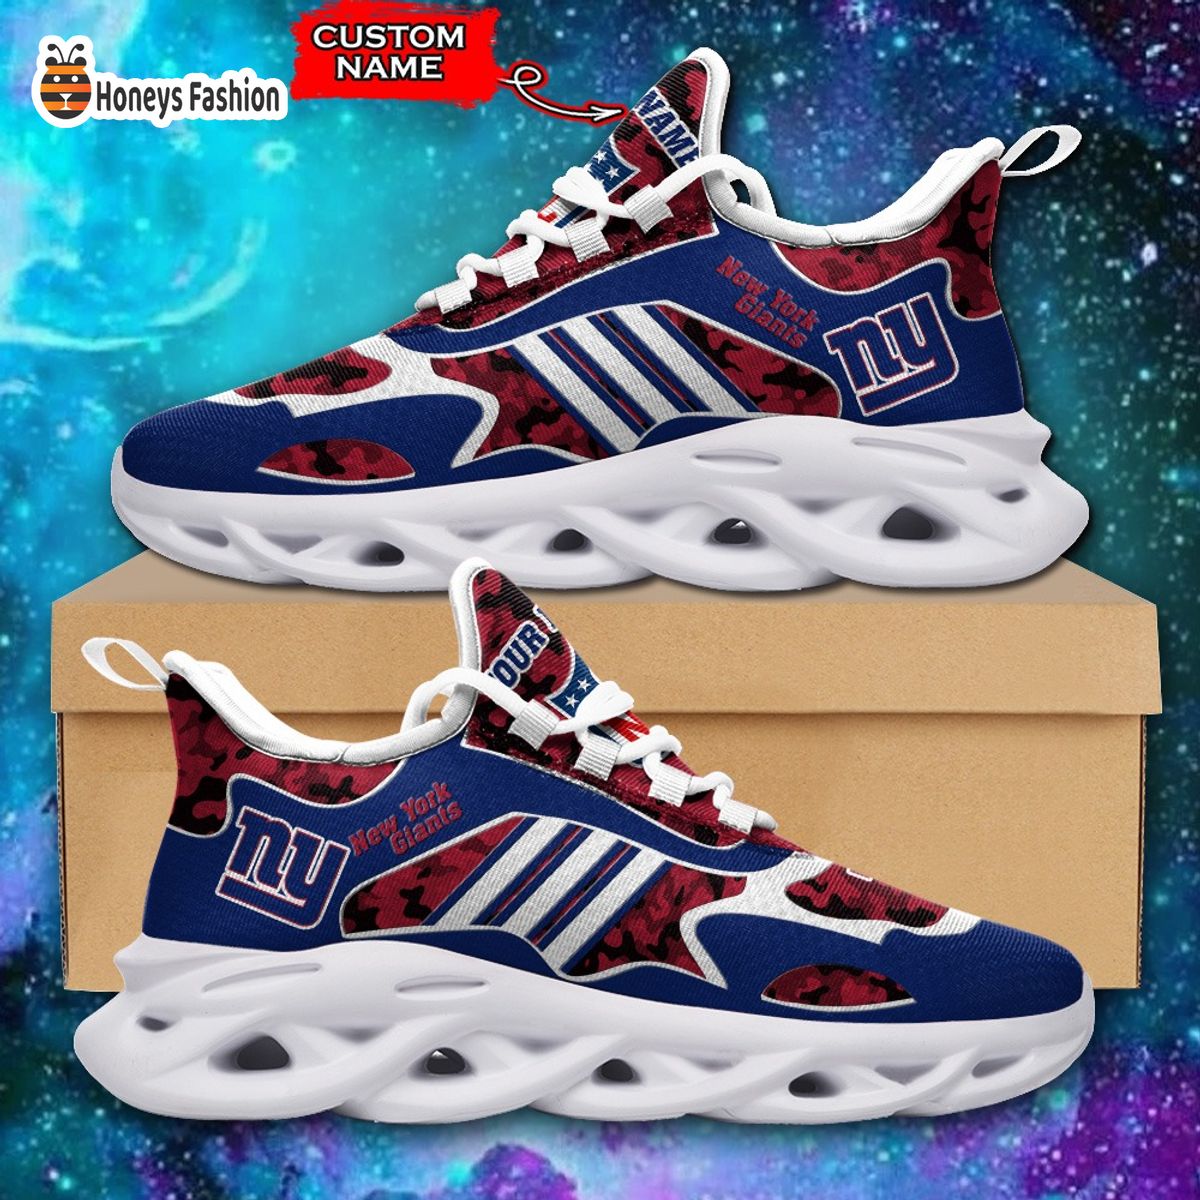 New York Giants NFL Adidas Personalized Max Soul Shoes